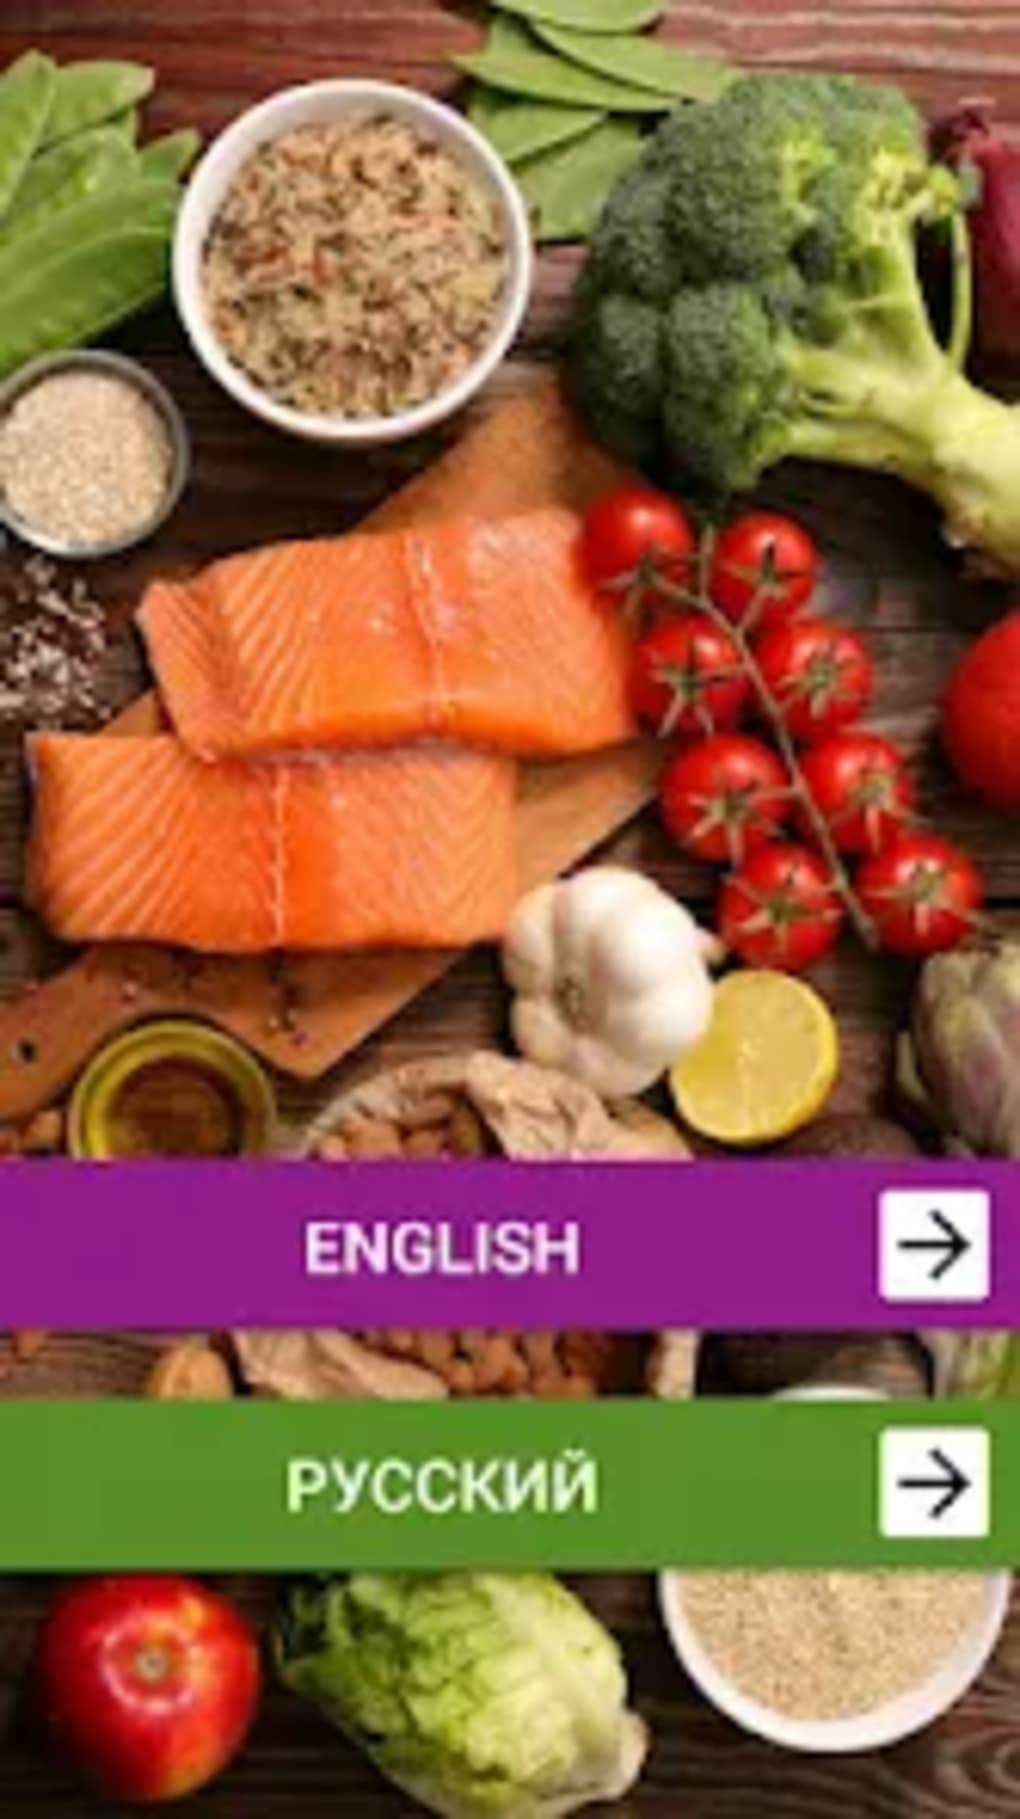 Dukan Diet official app - Apps on Google Play